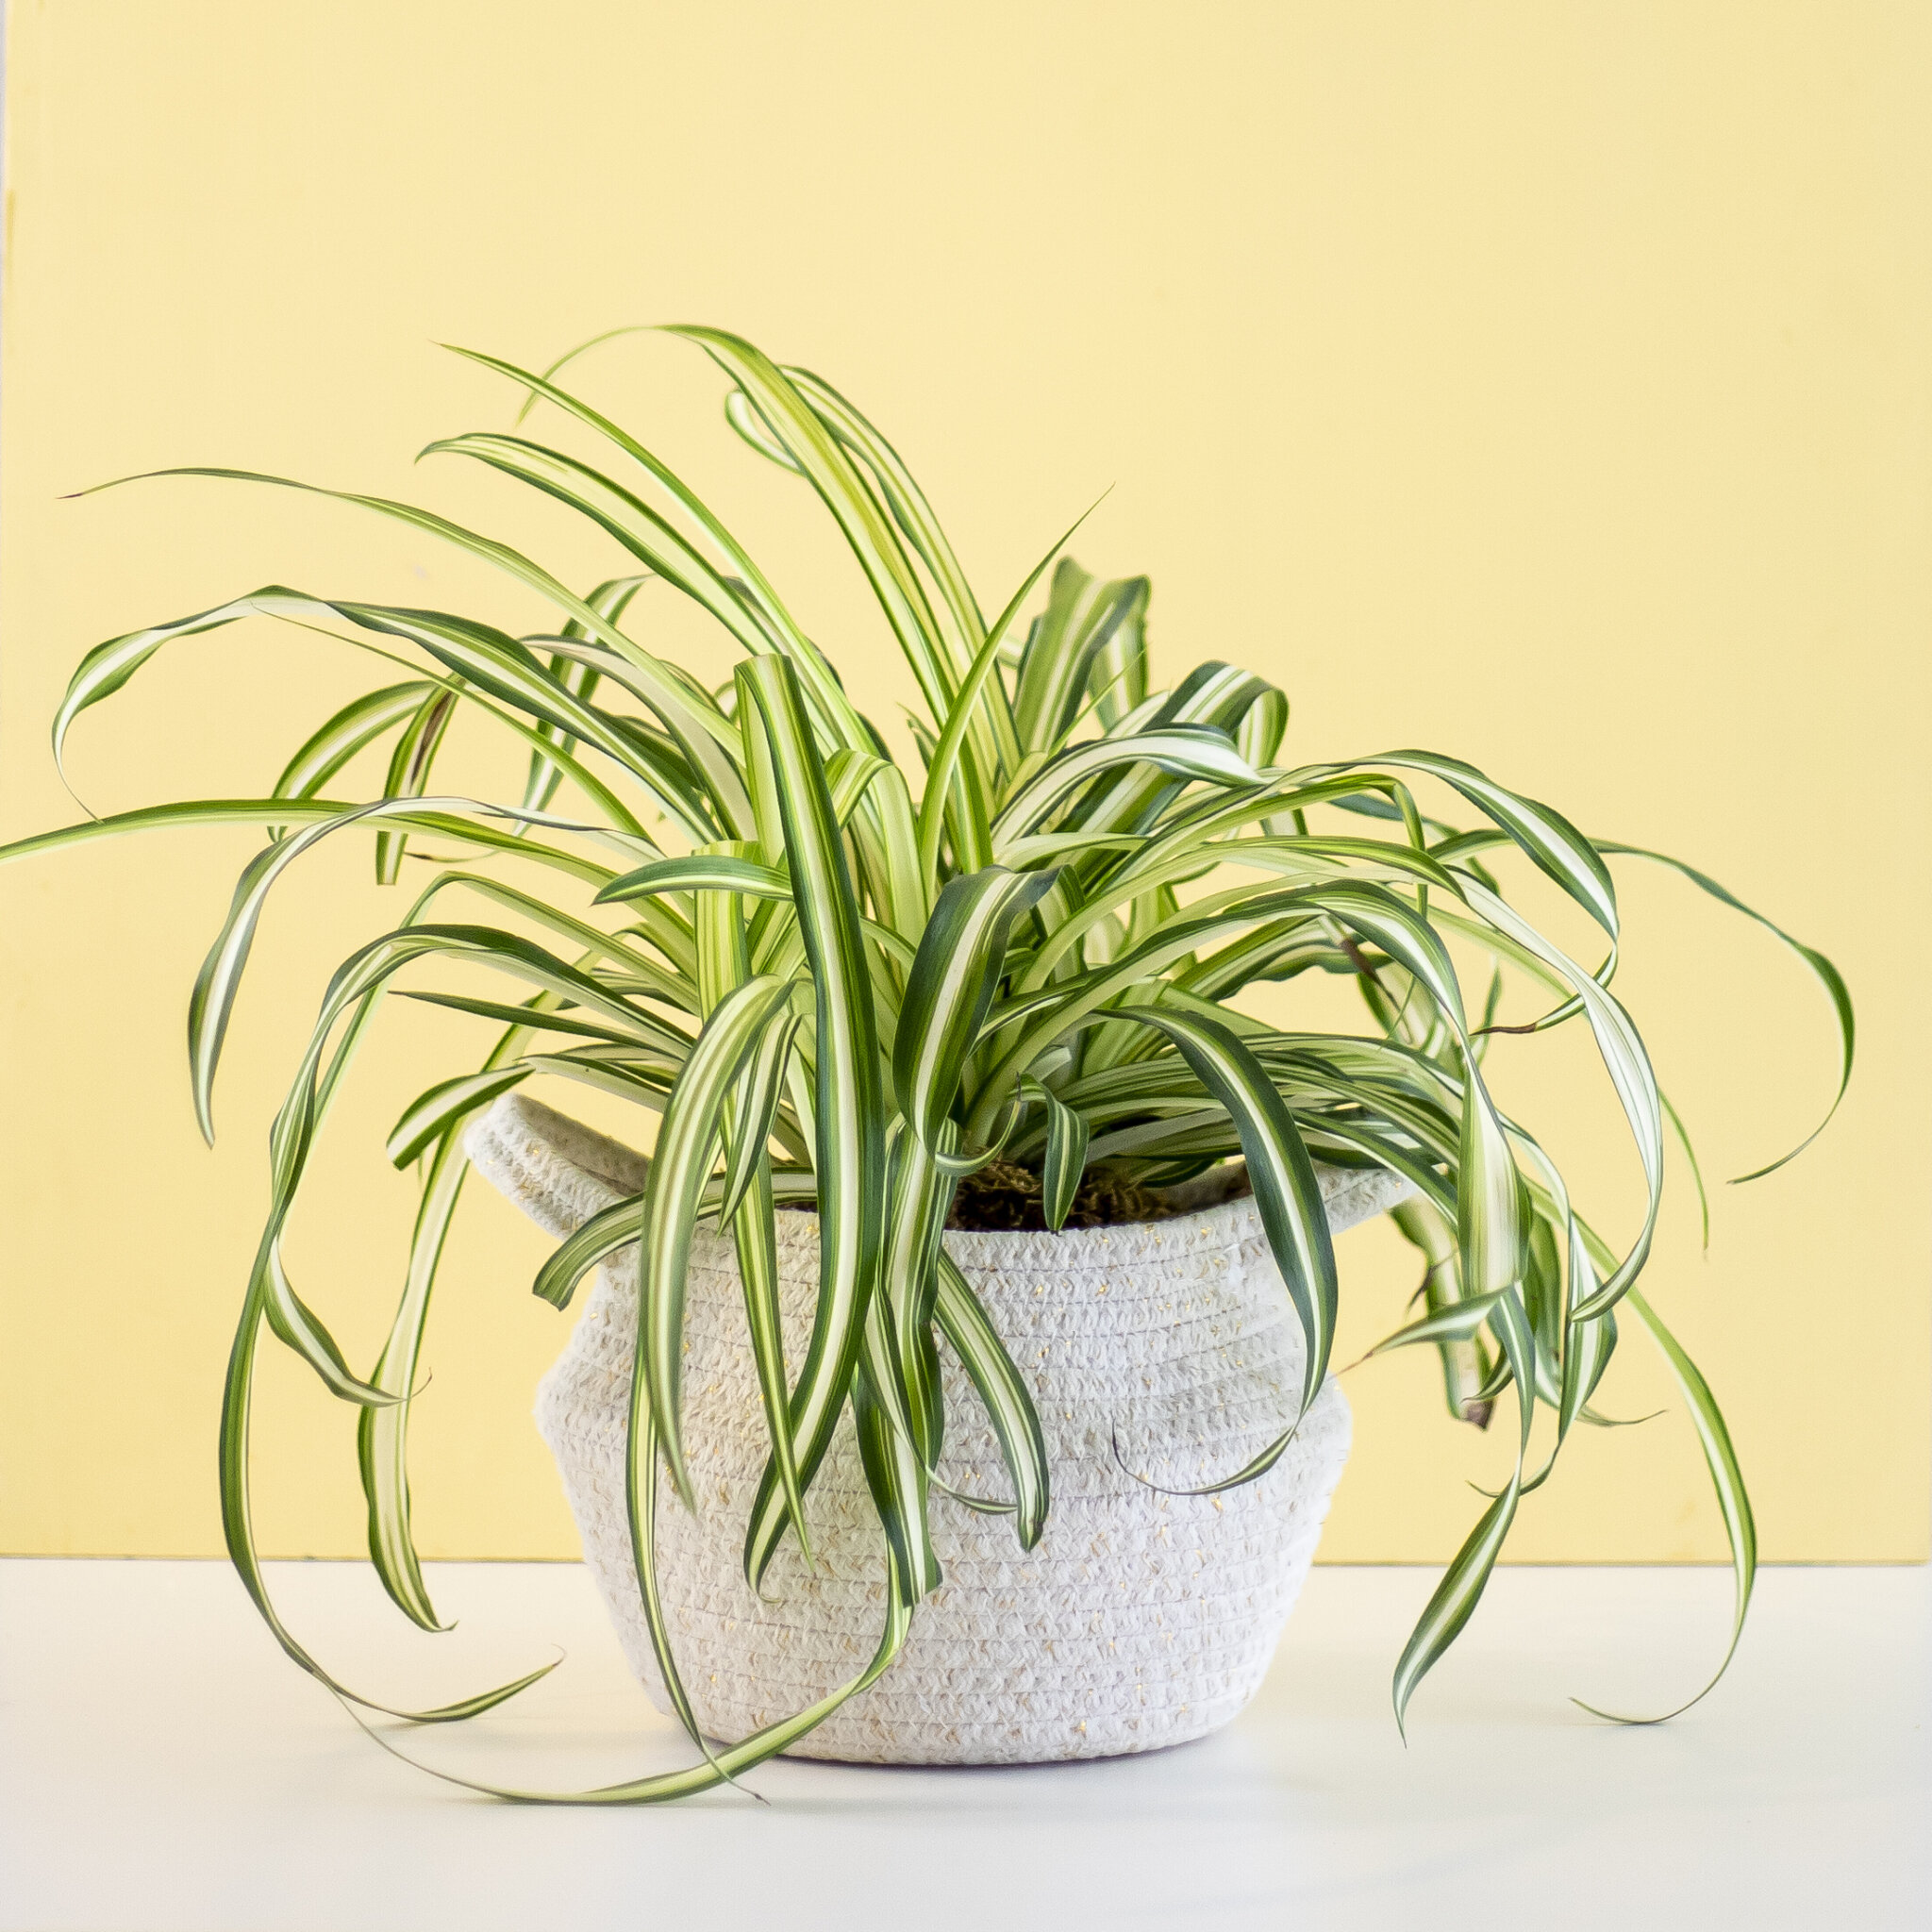 A green spider plant in a woven fabric planter sitting in front of a yellow background